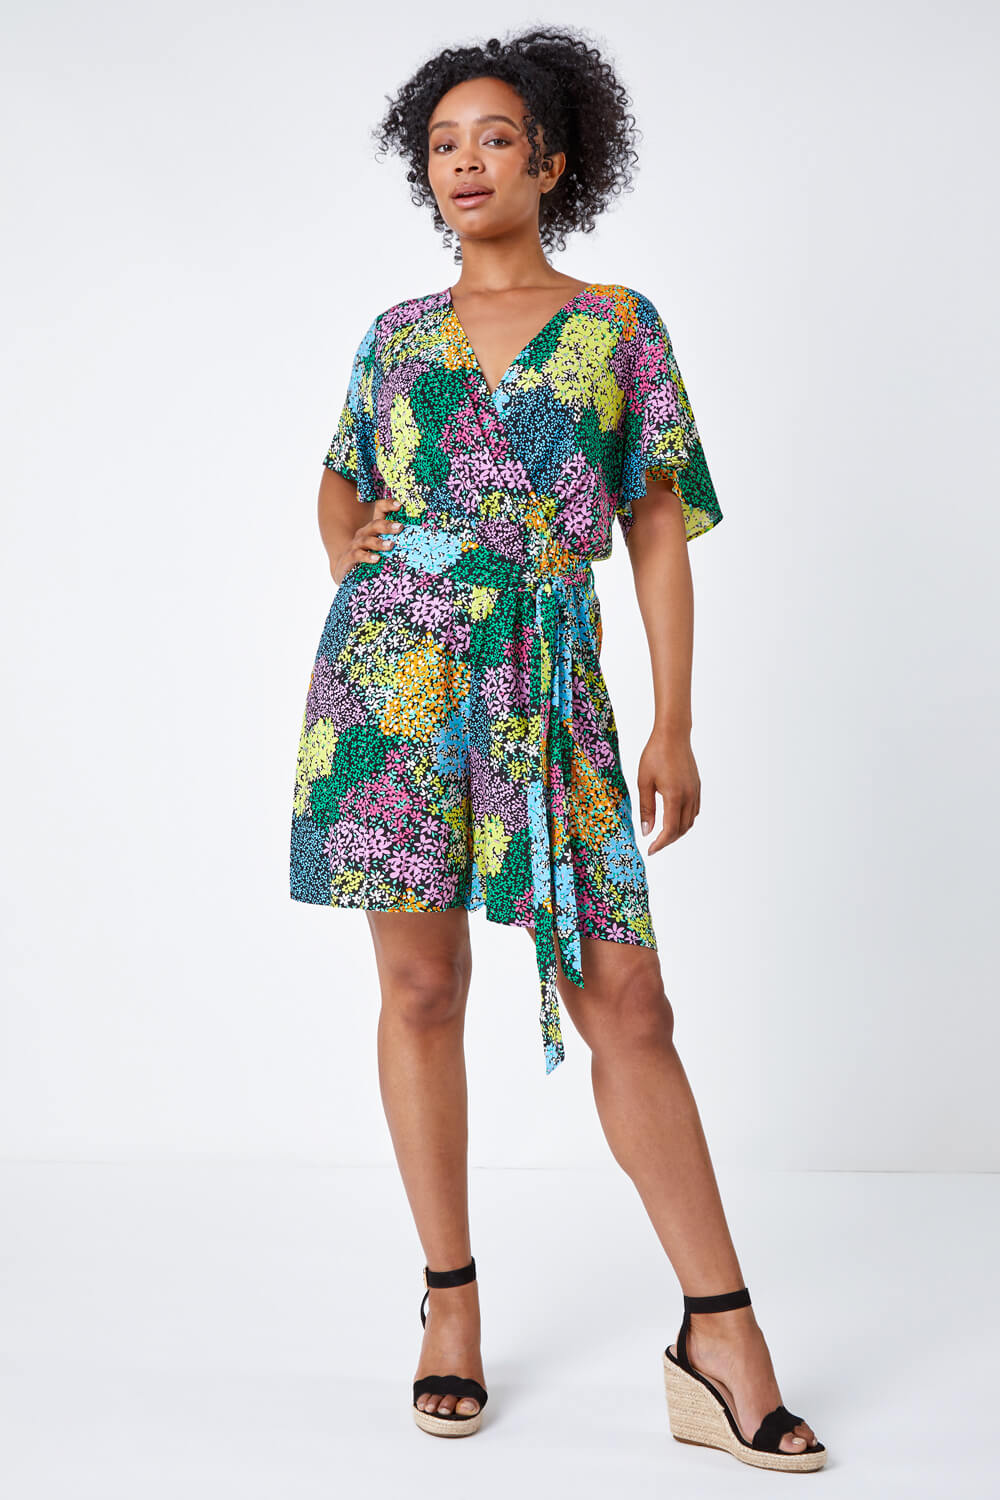 Black Petite Ditsy Floral Belted Playsuit, Image 2 of 5